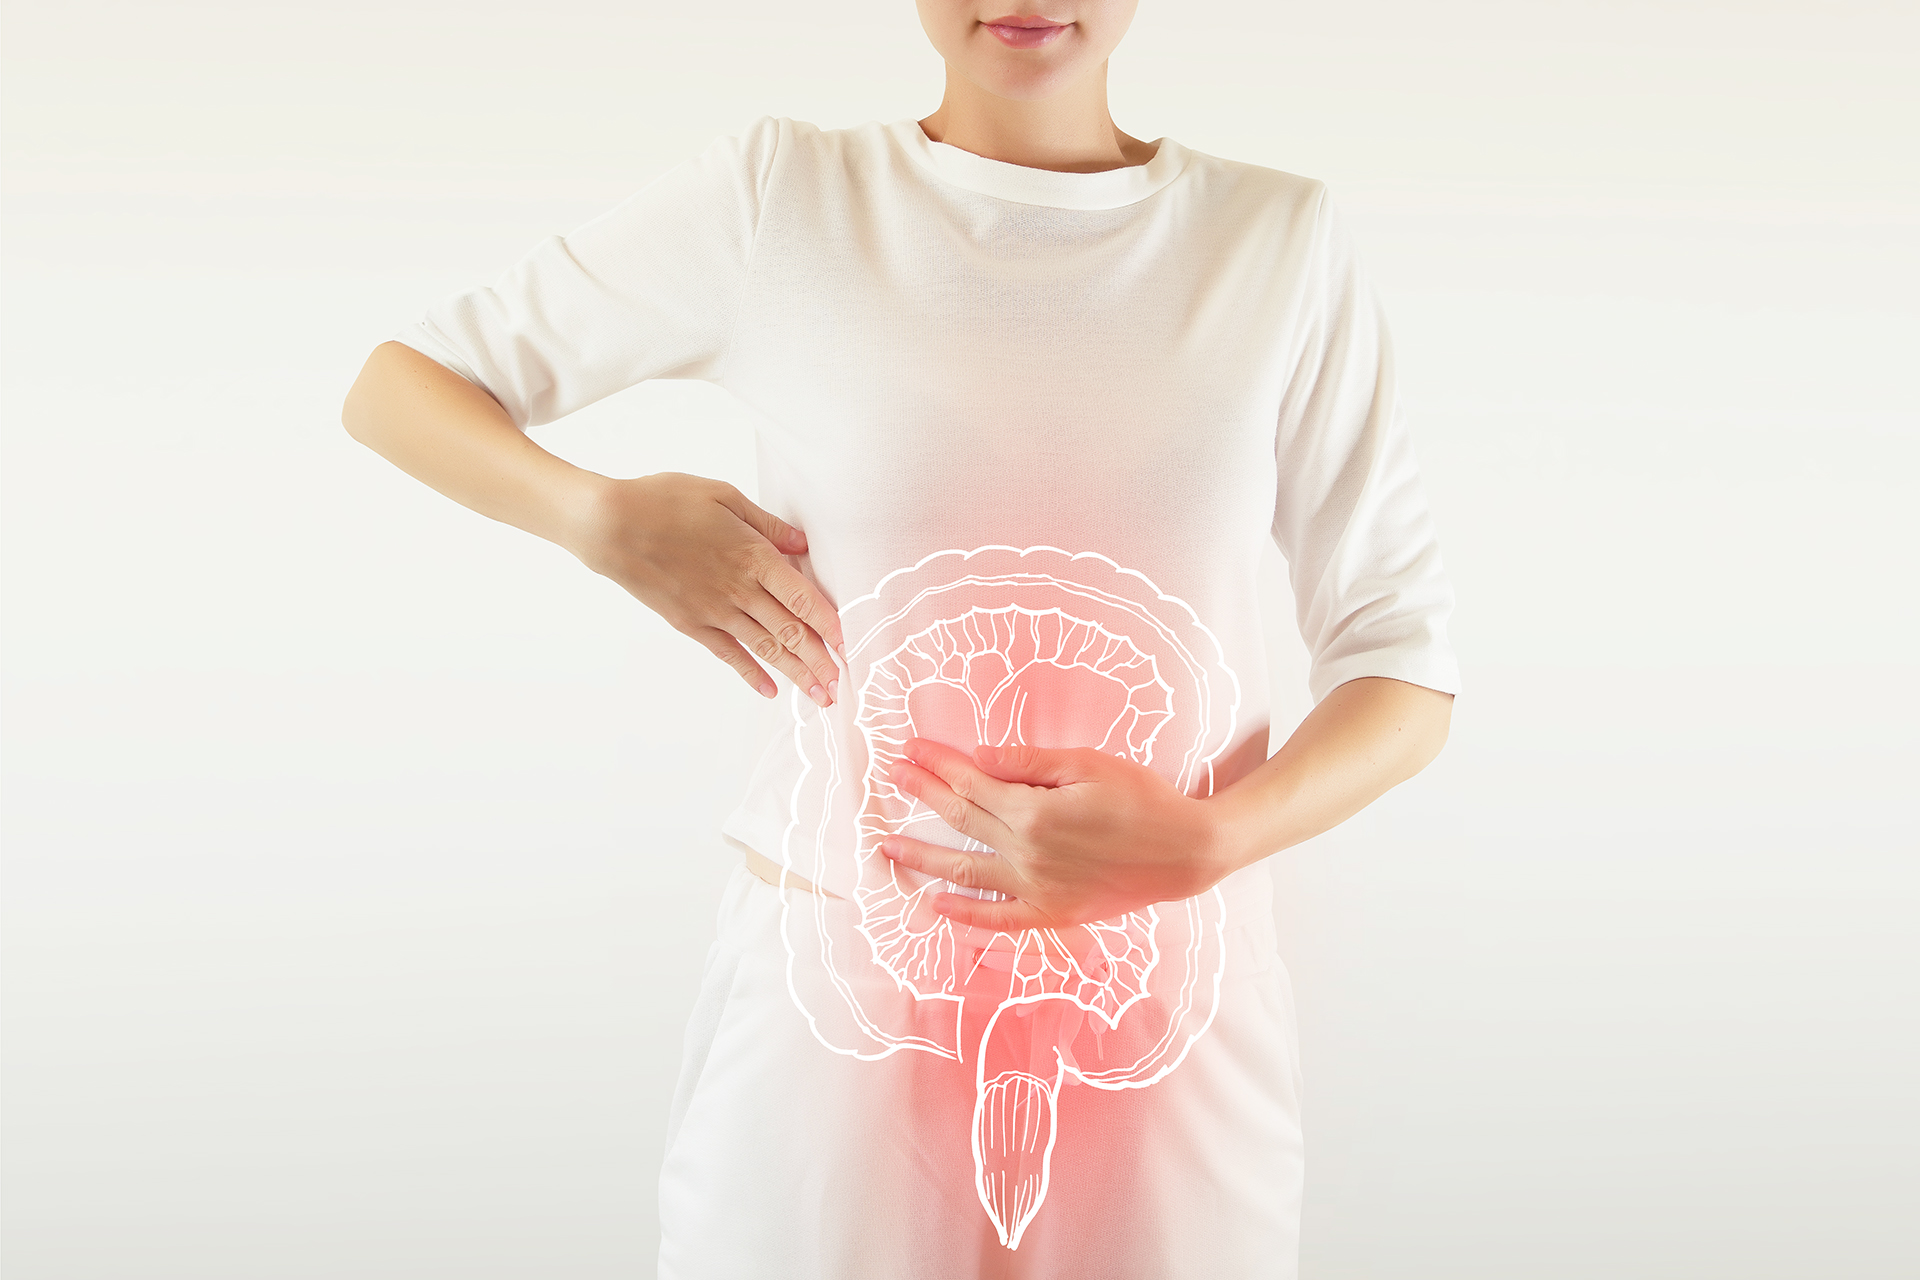 Irritable Bowel Syndrome (IBS): FODMAP Diet | Lifestyle | Supplements